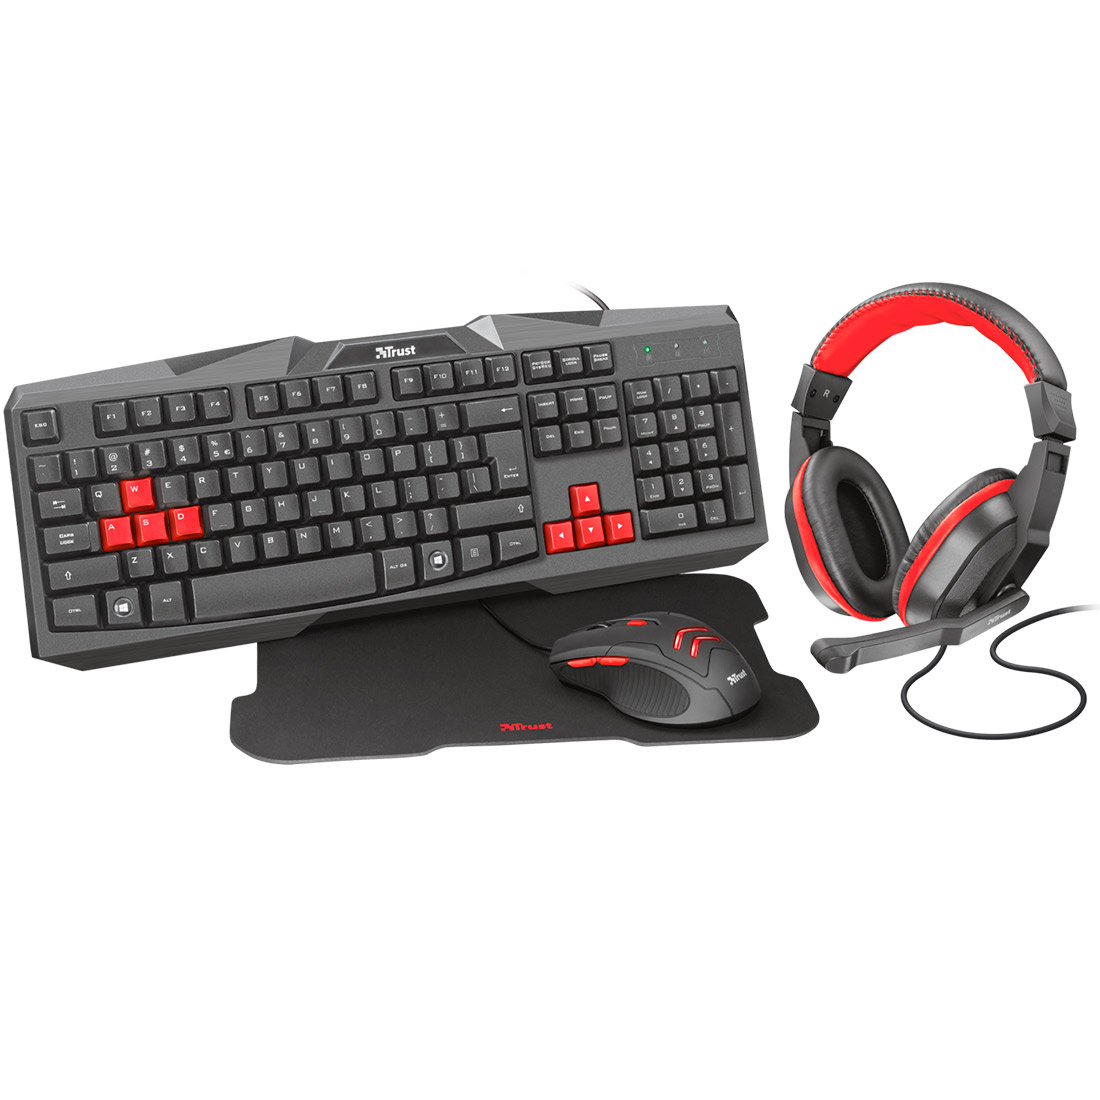 COMBO TRUST: Teclado, Mouse, Mouse Pad y Auriculares